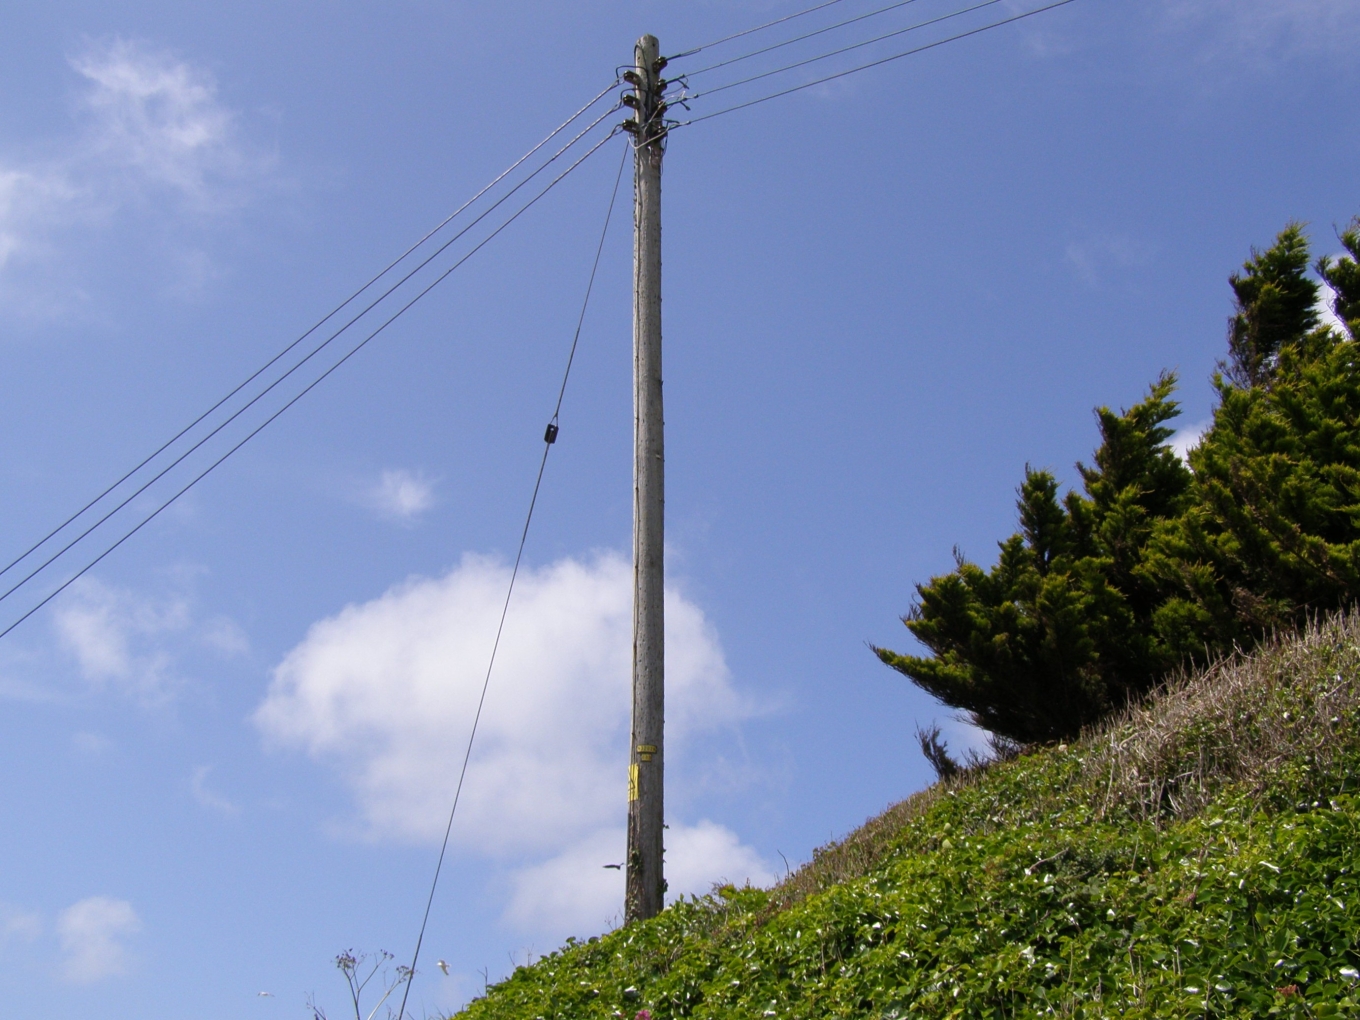 A wooden pole with overhead lines